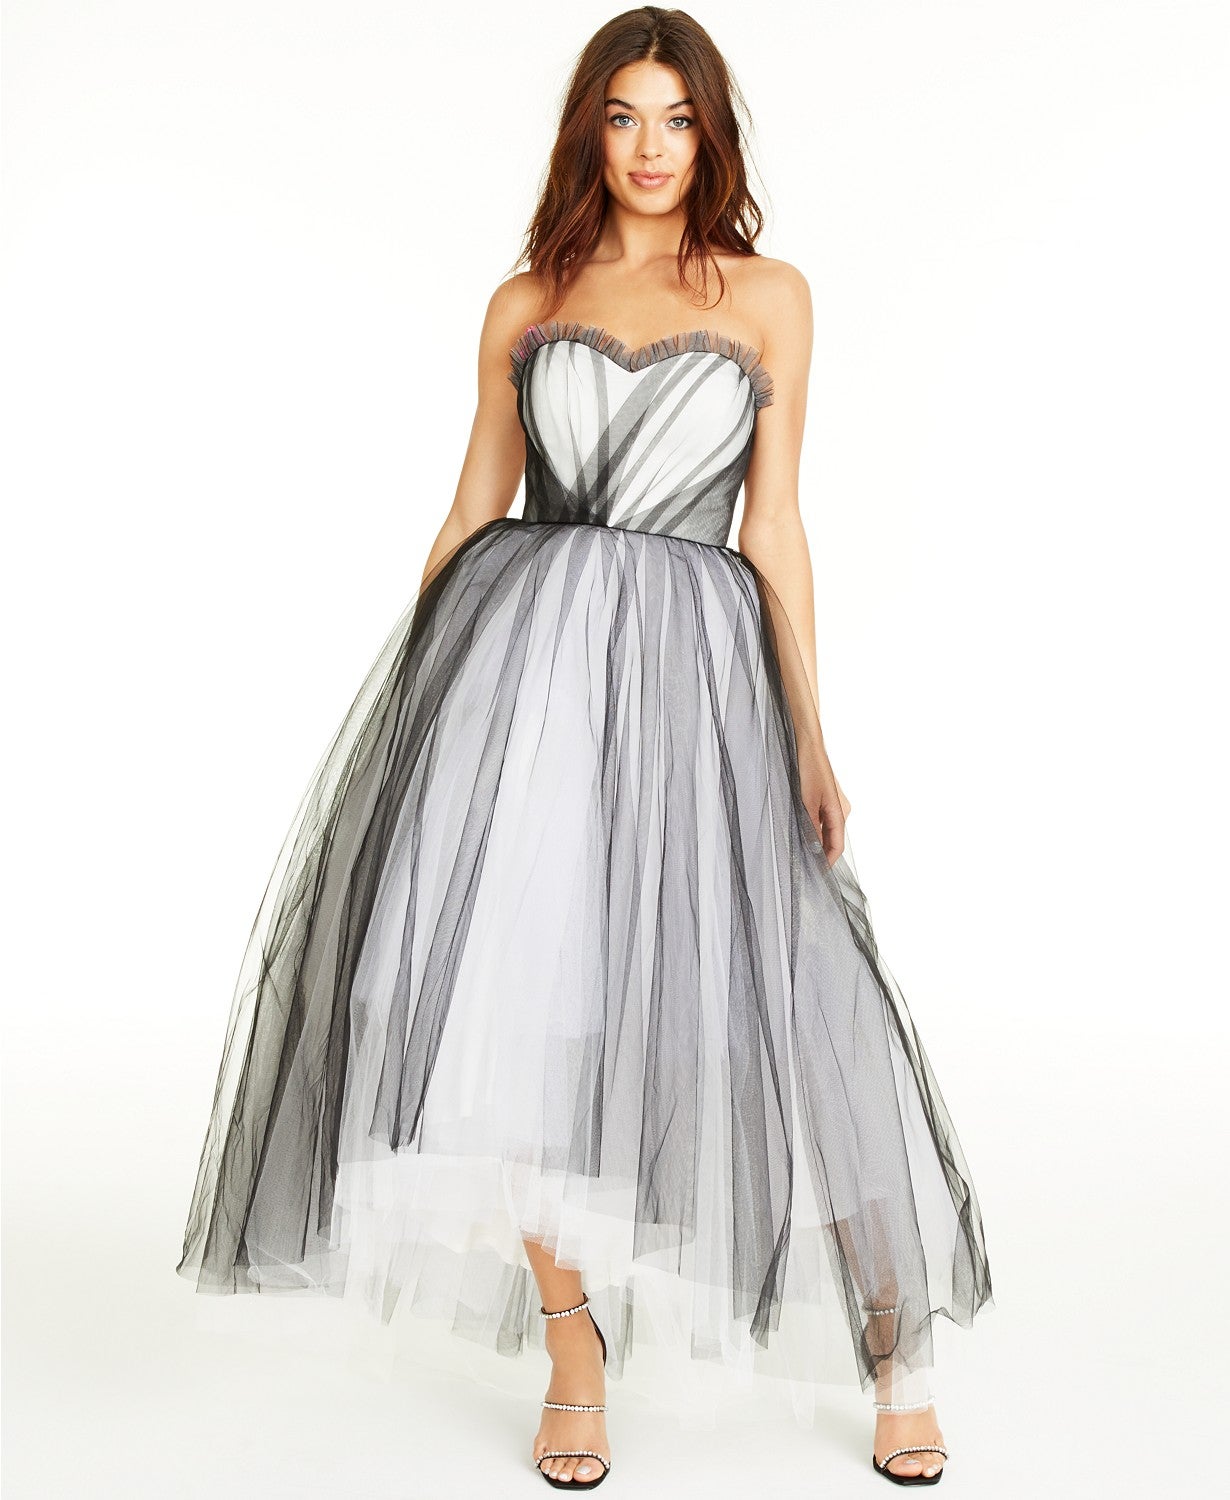 Betsey Johnson Sweetheart-Neck Strapless High-Low Gown.jpeg